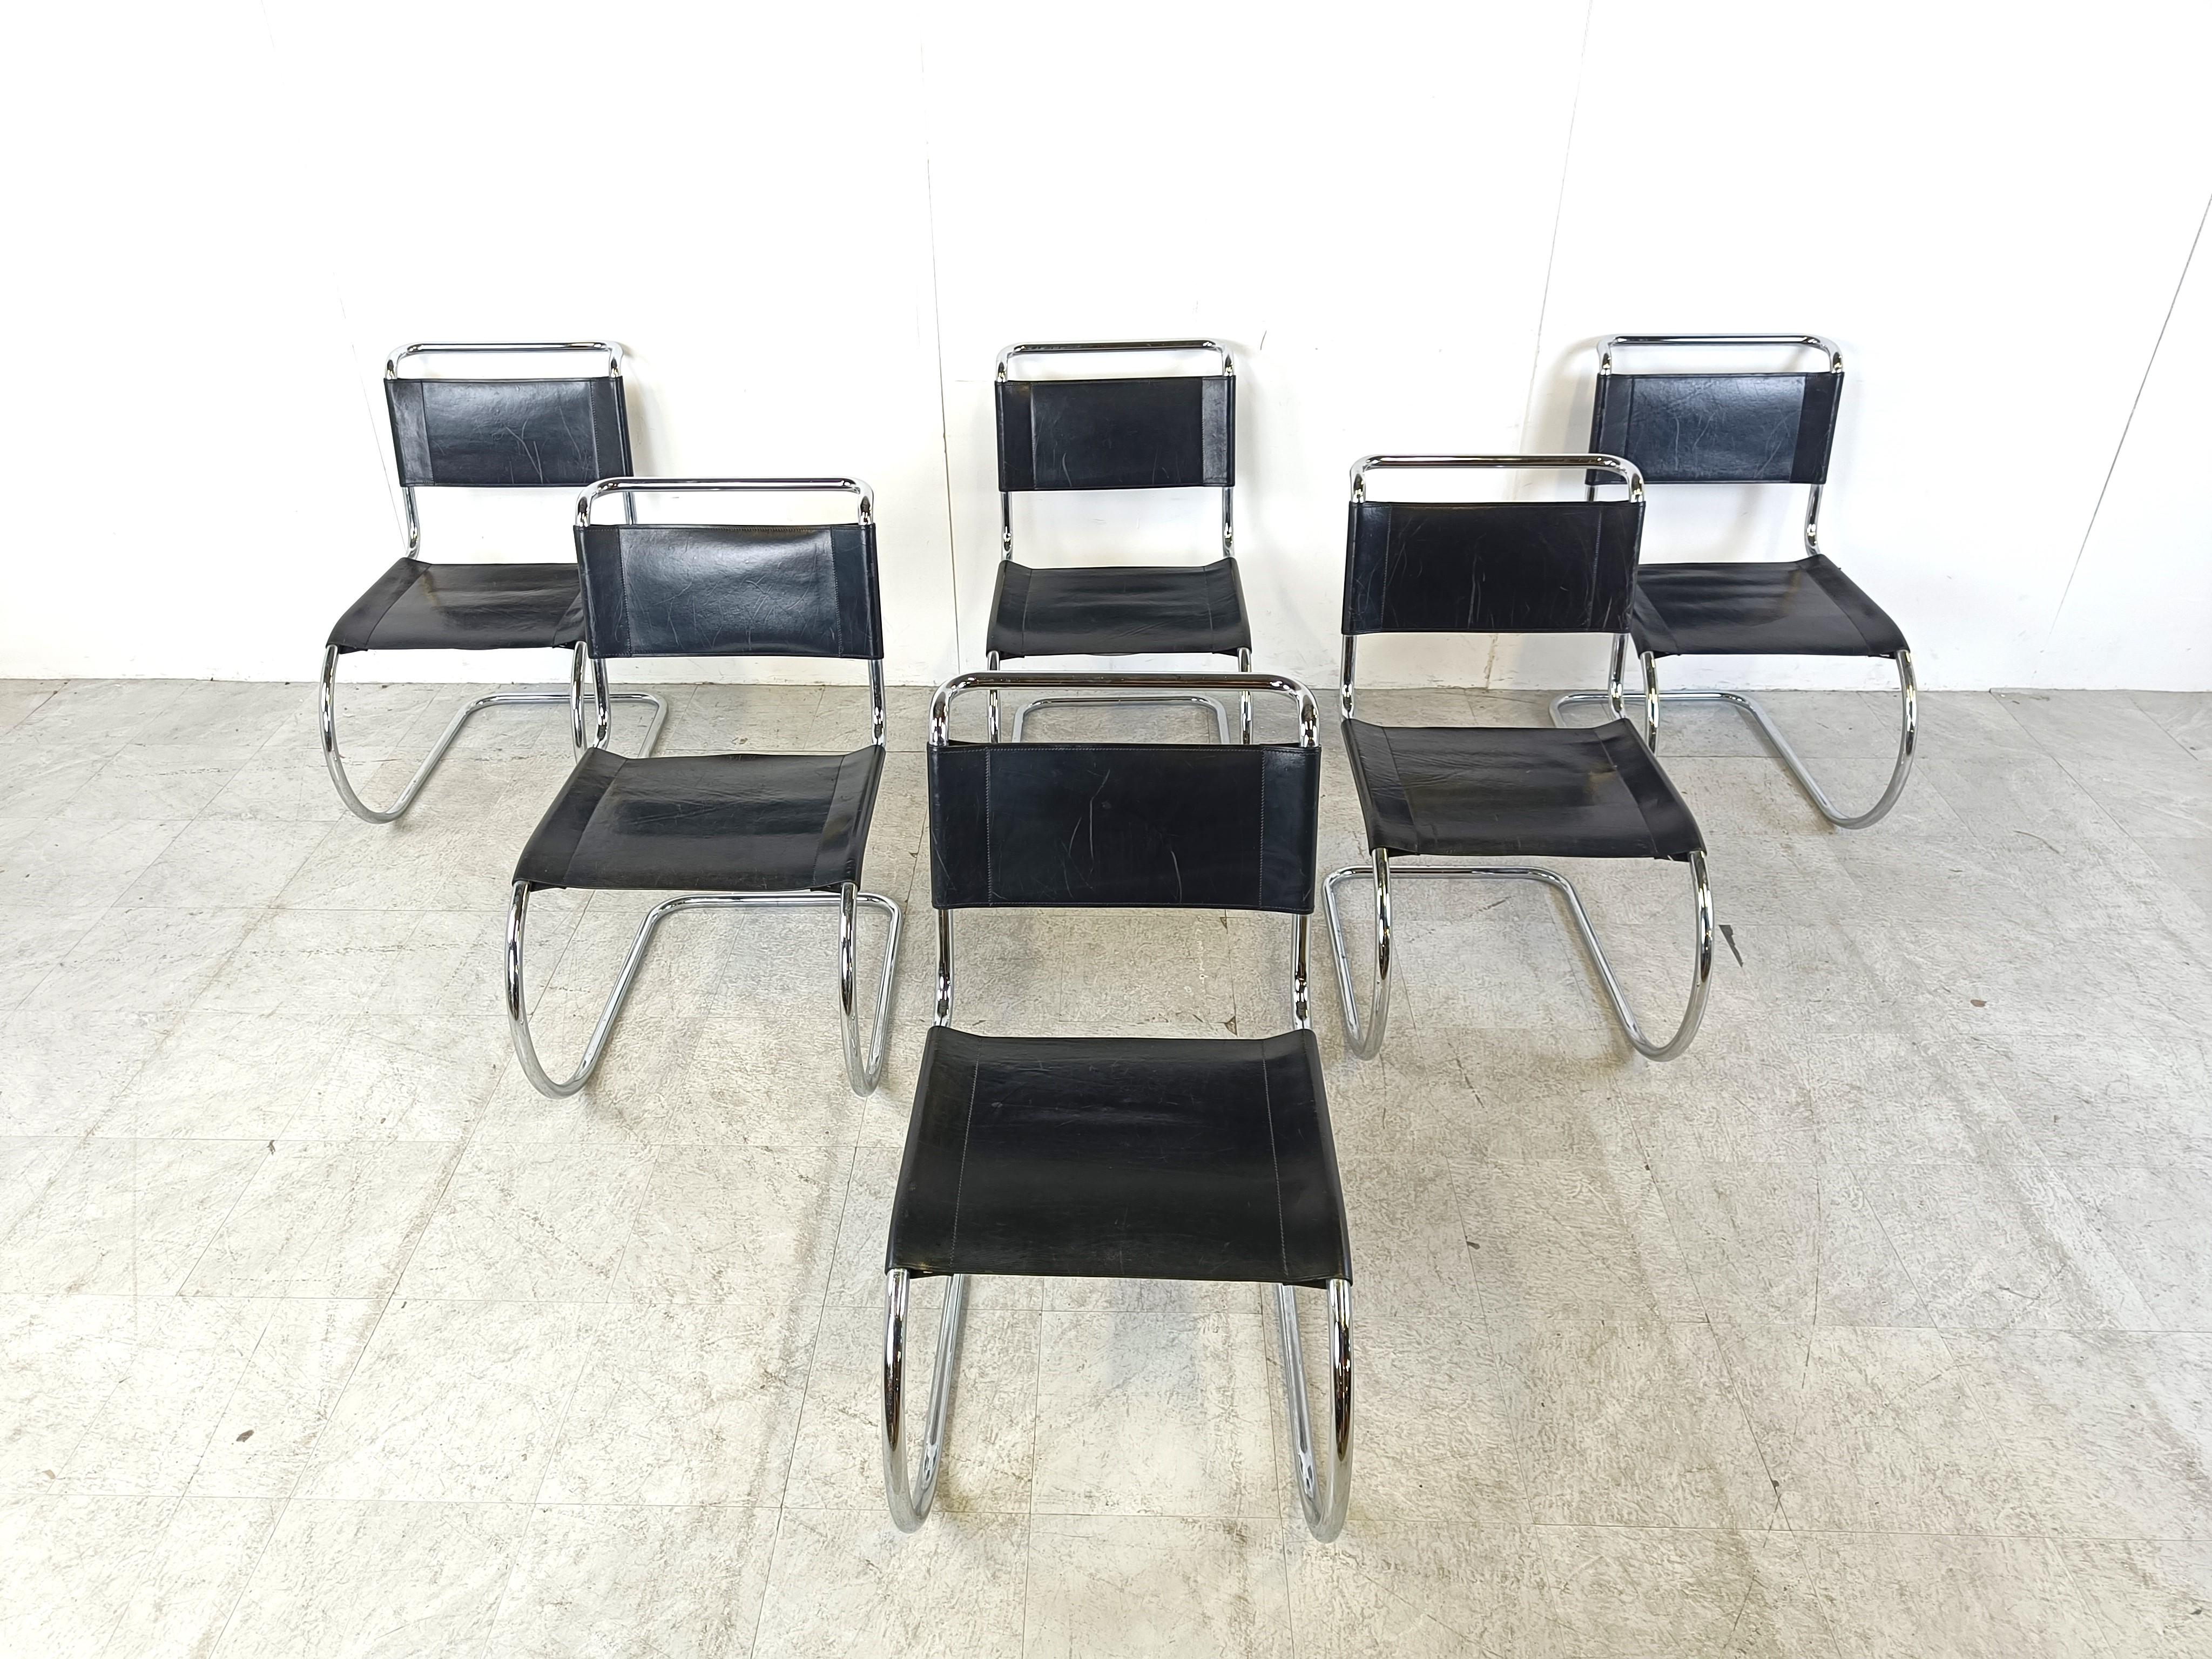 Vintage  cantilever dining chairs designed by Ludwig Mies van der Rohe and produced by Thonet.

Beautiful elegant Bauhaus design dating from the 1920s with a chromed metal tubular frame and thick quality black sling leather seats and